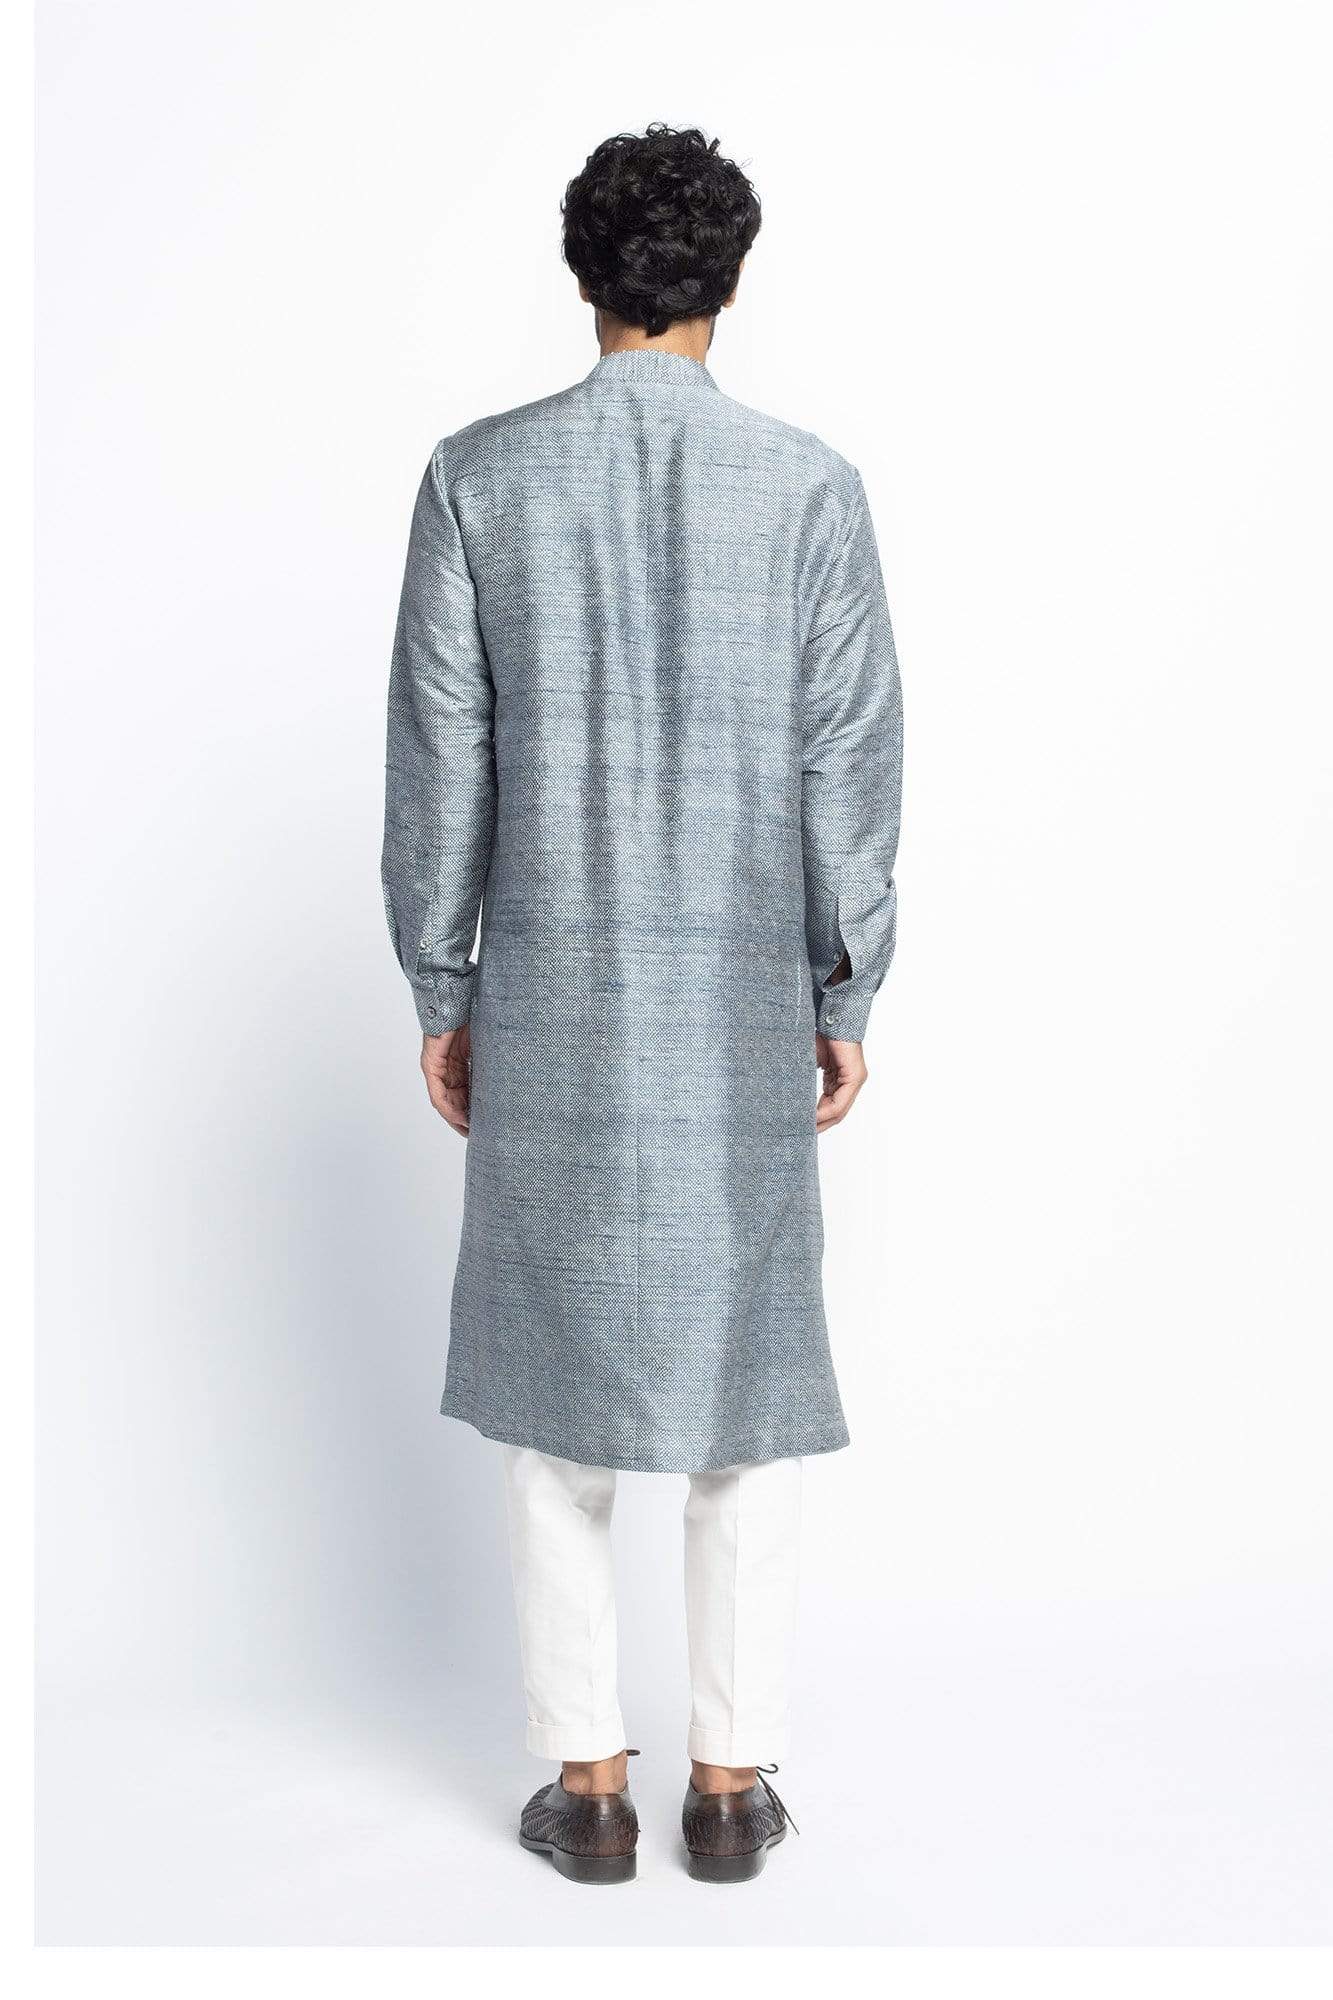 Barish Print Kurta Set Indian Clothing in Denver, CO, Aurora, CO, Boulder, CO, Fort Collins, CO, Colorado Springs, CO, Parker, CO, Highlands Ranch, CO, Cherry Creek, CO, Centennial, CO, and Longmont, CO. NATIONWIDE SHIPPING USA- India Fashion X